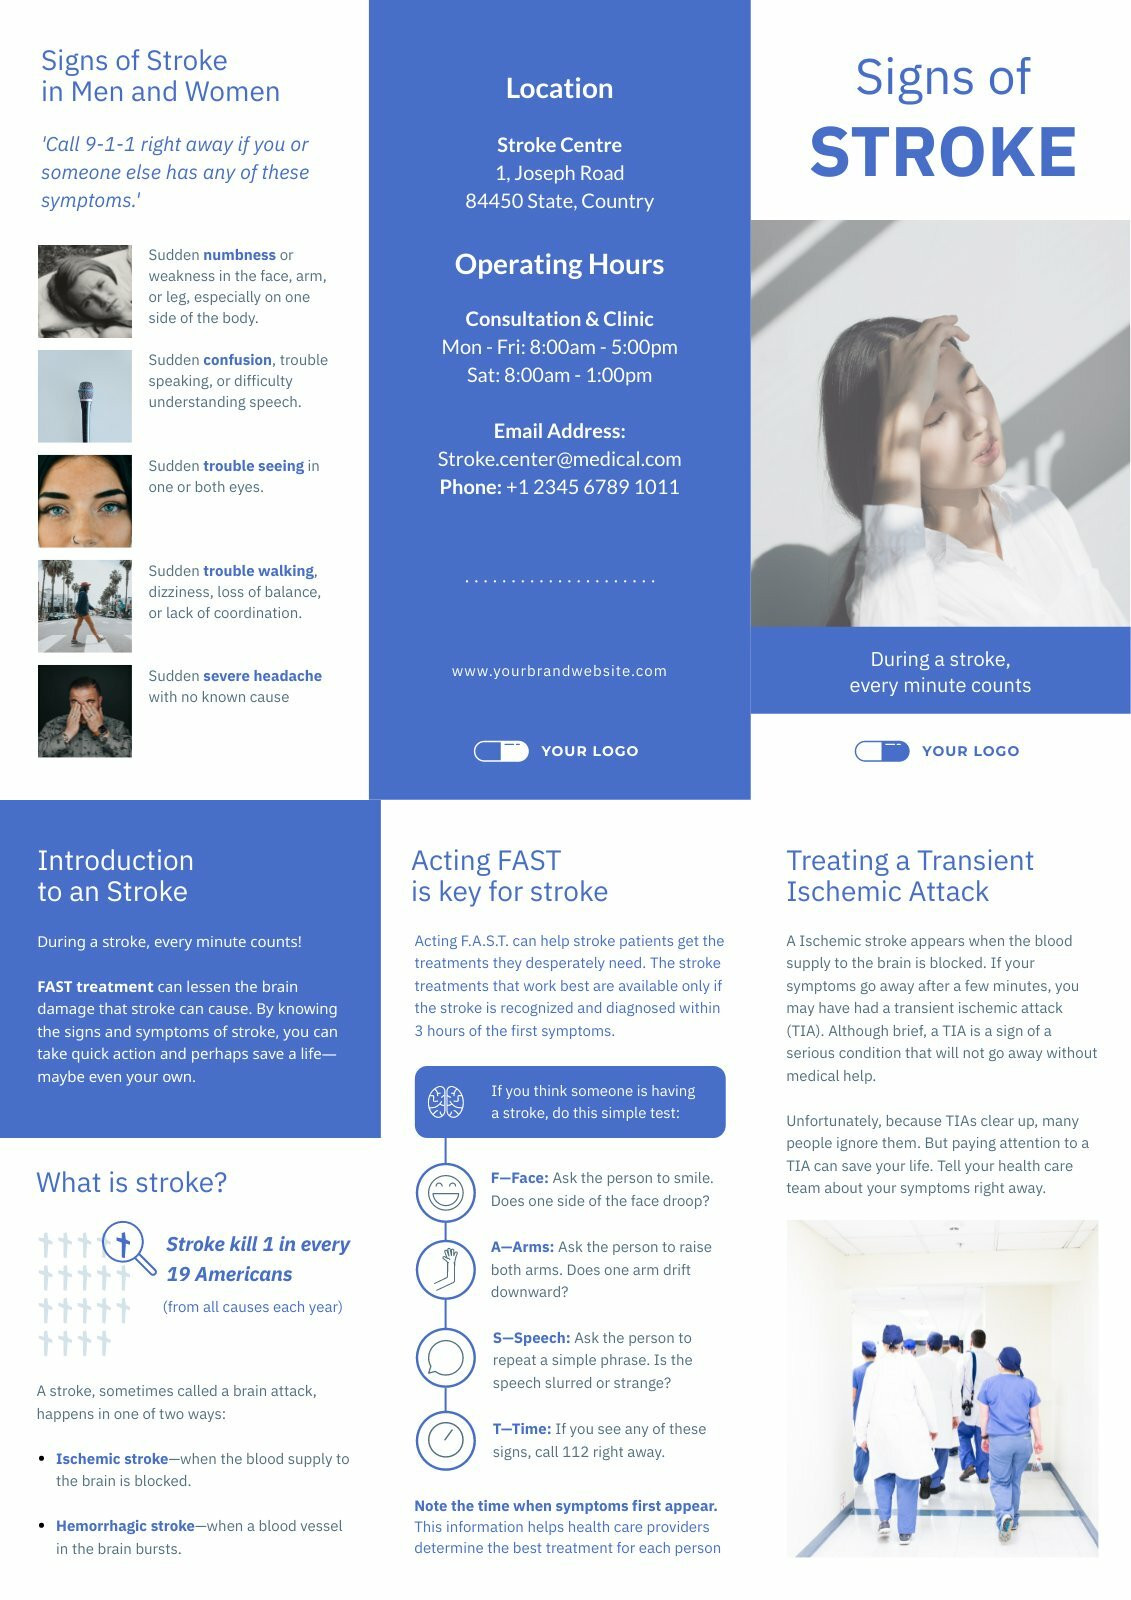 Signs of Stroke Trifold Brochure